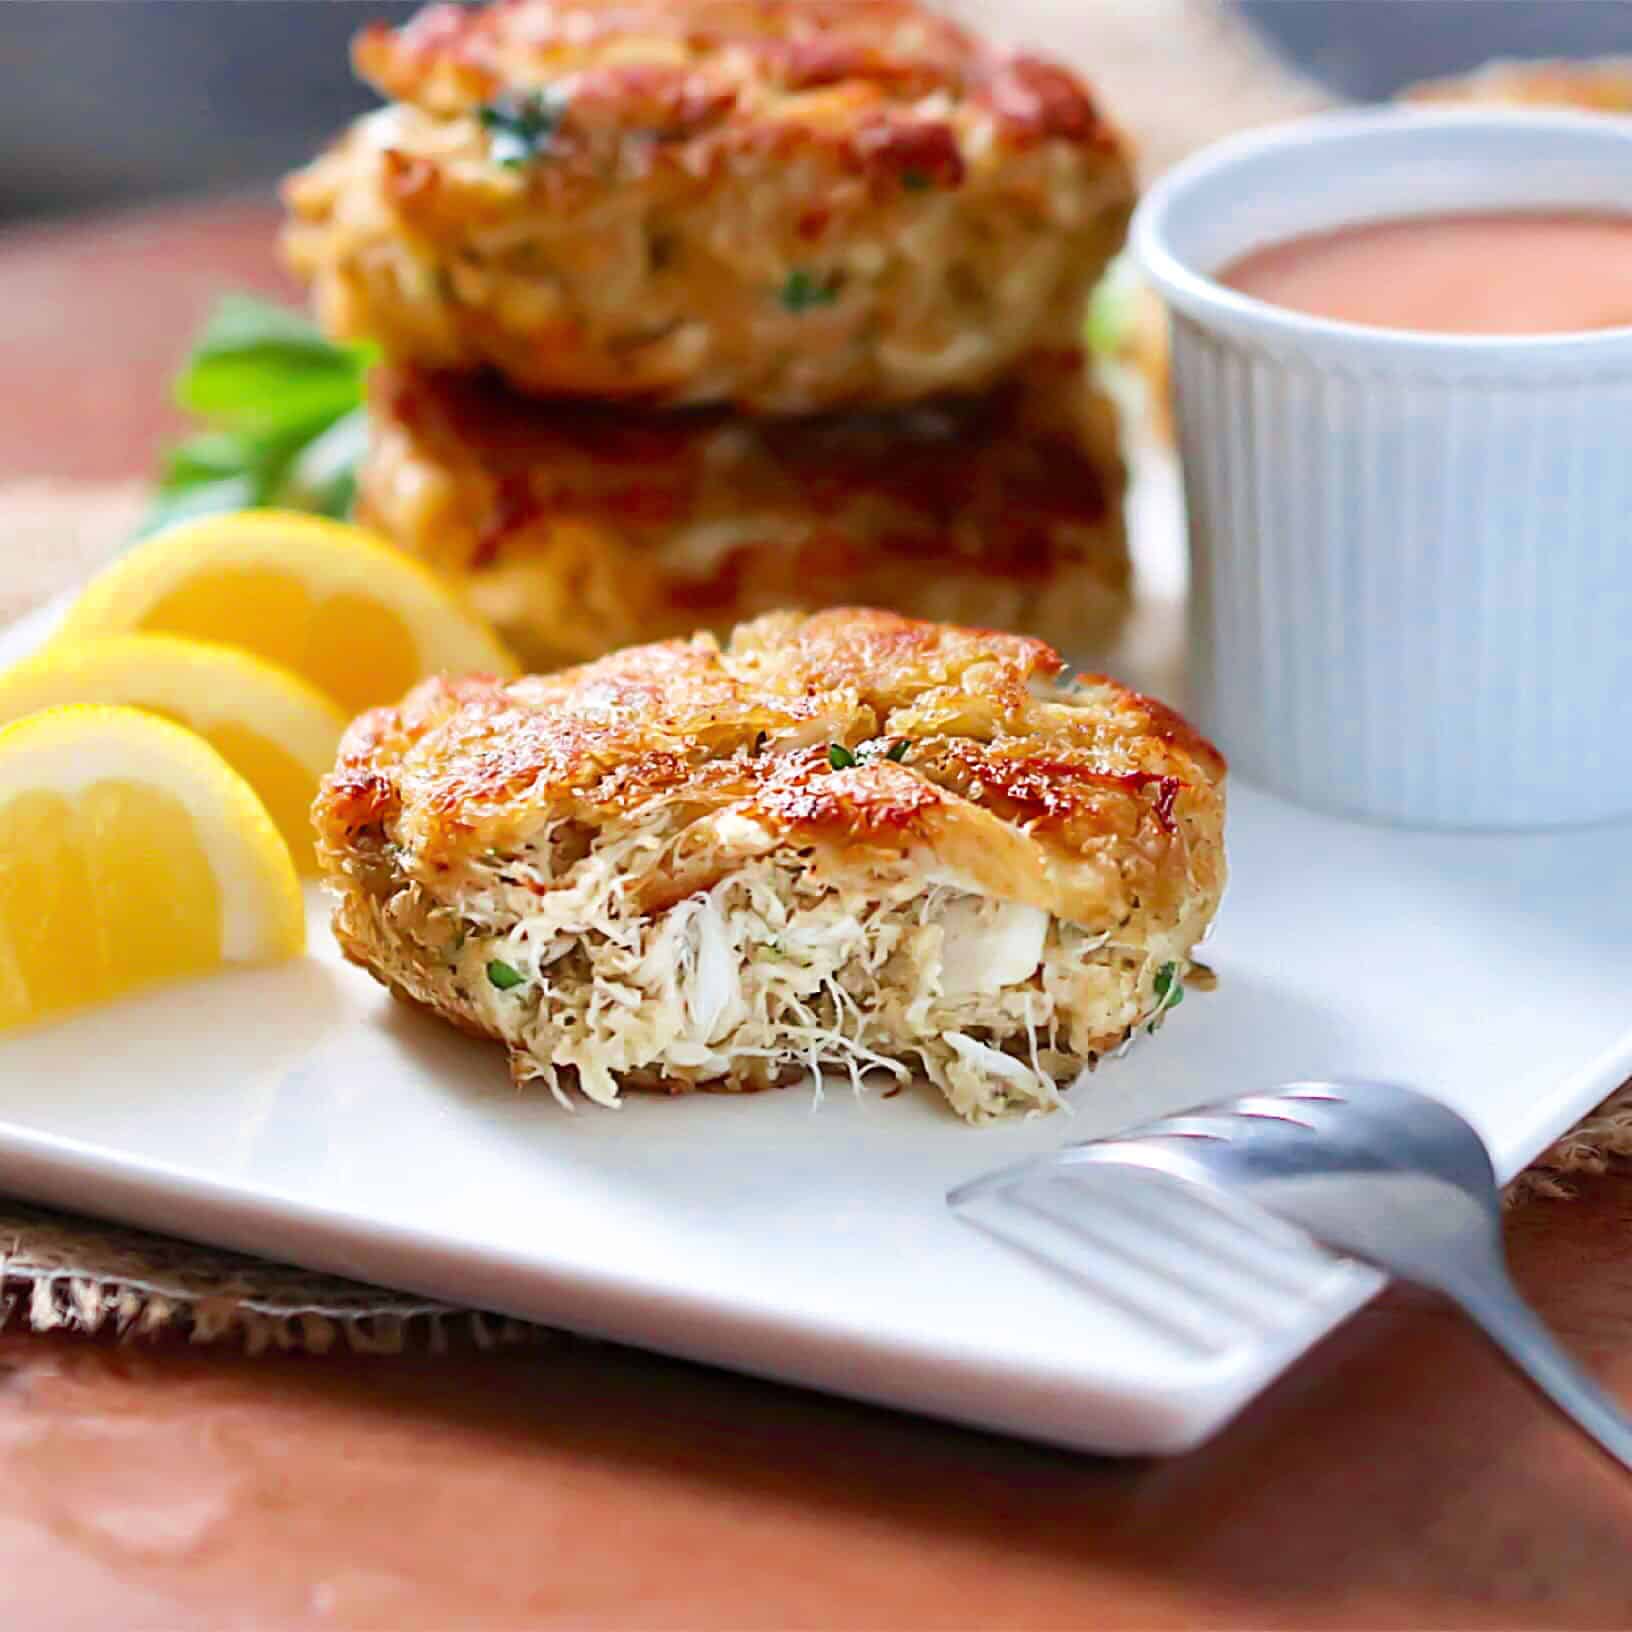 Crab Cakes with lemon wedges